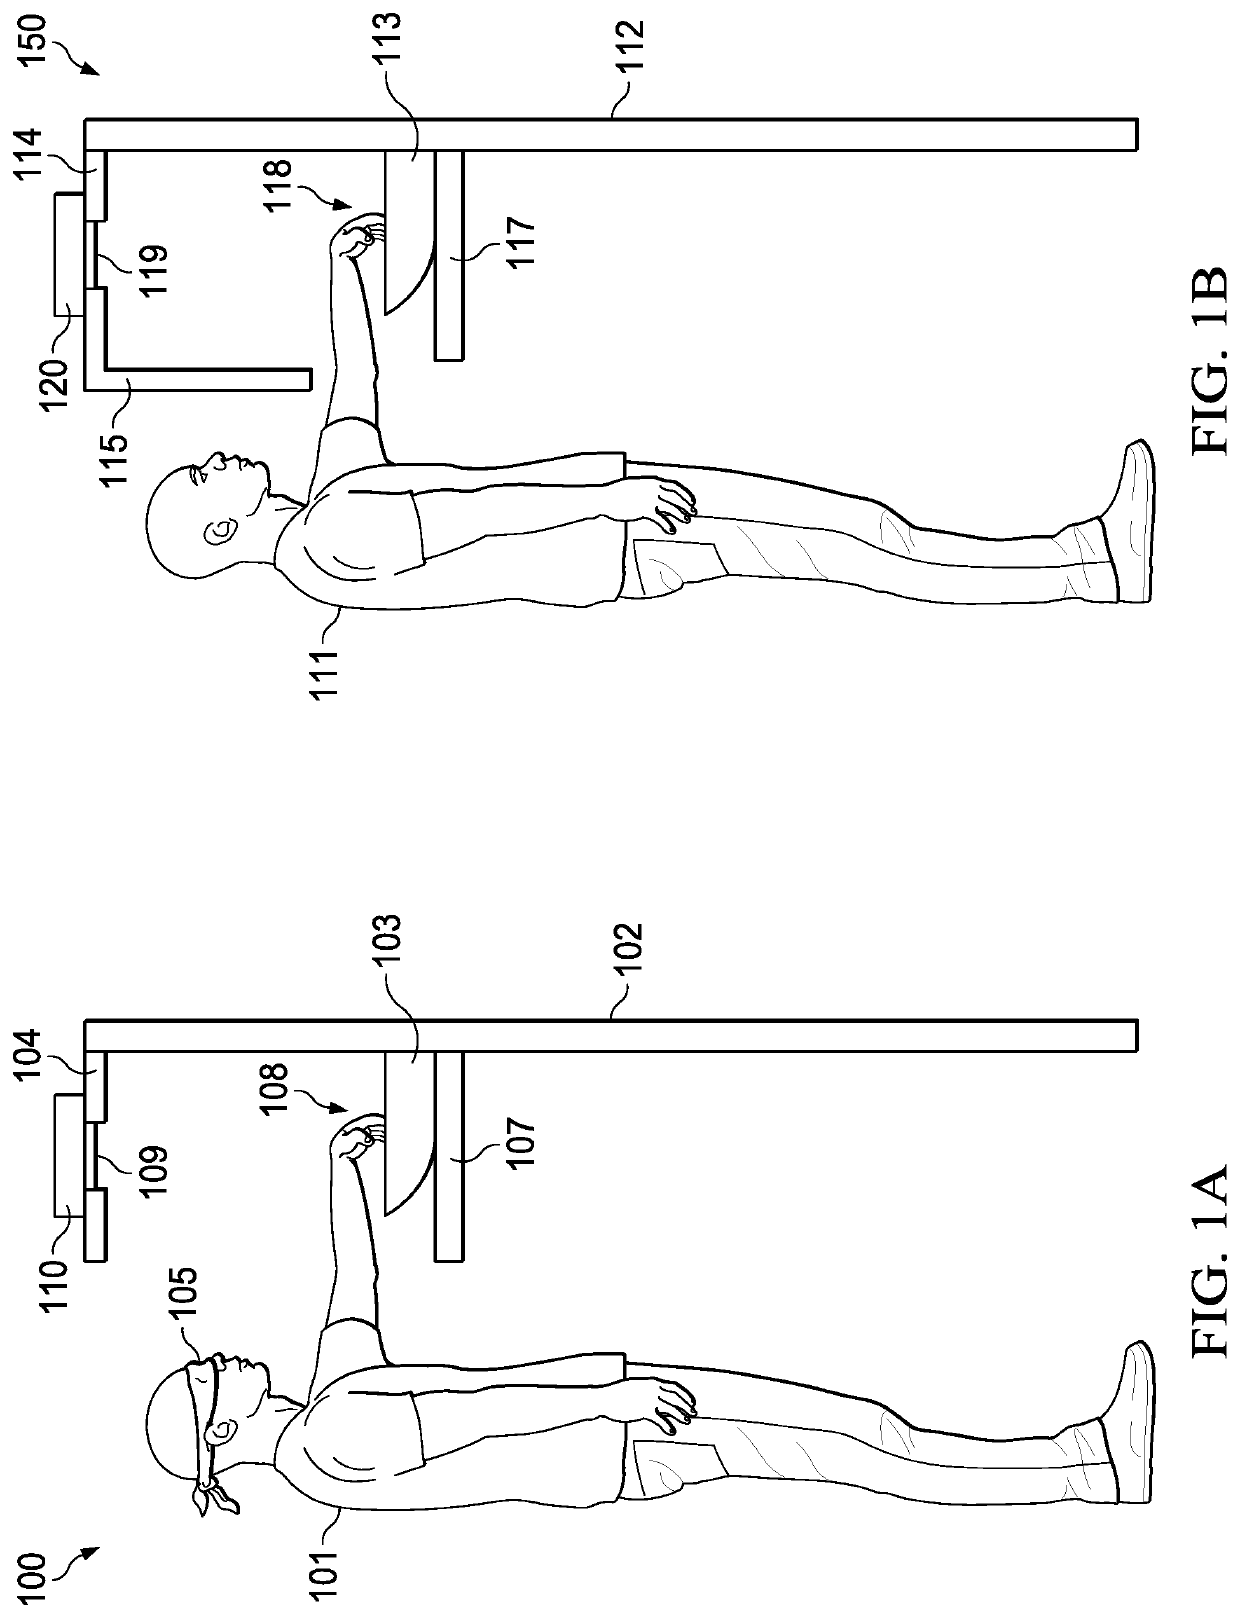 Stereognosis training system and method for patients with chronic stroke, spinal cord injury or neuropathy